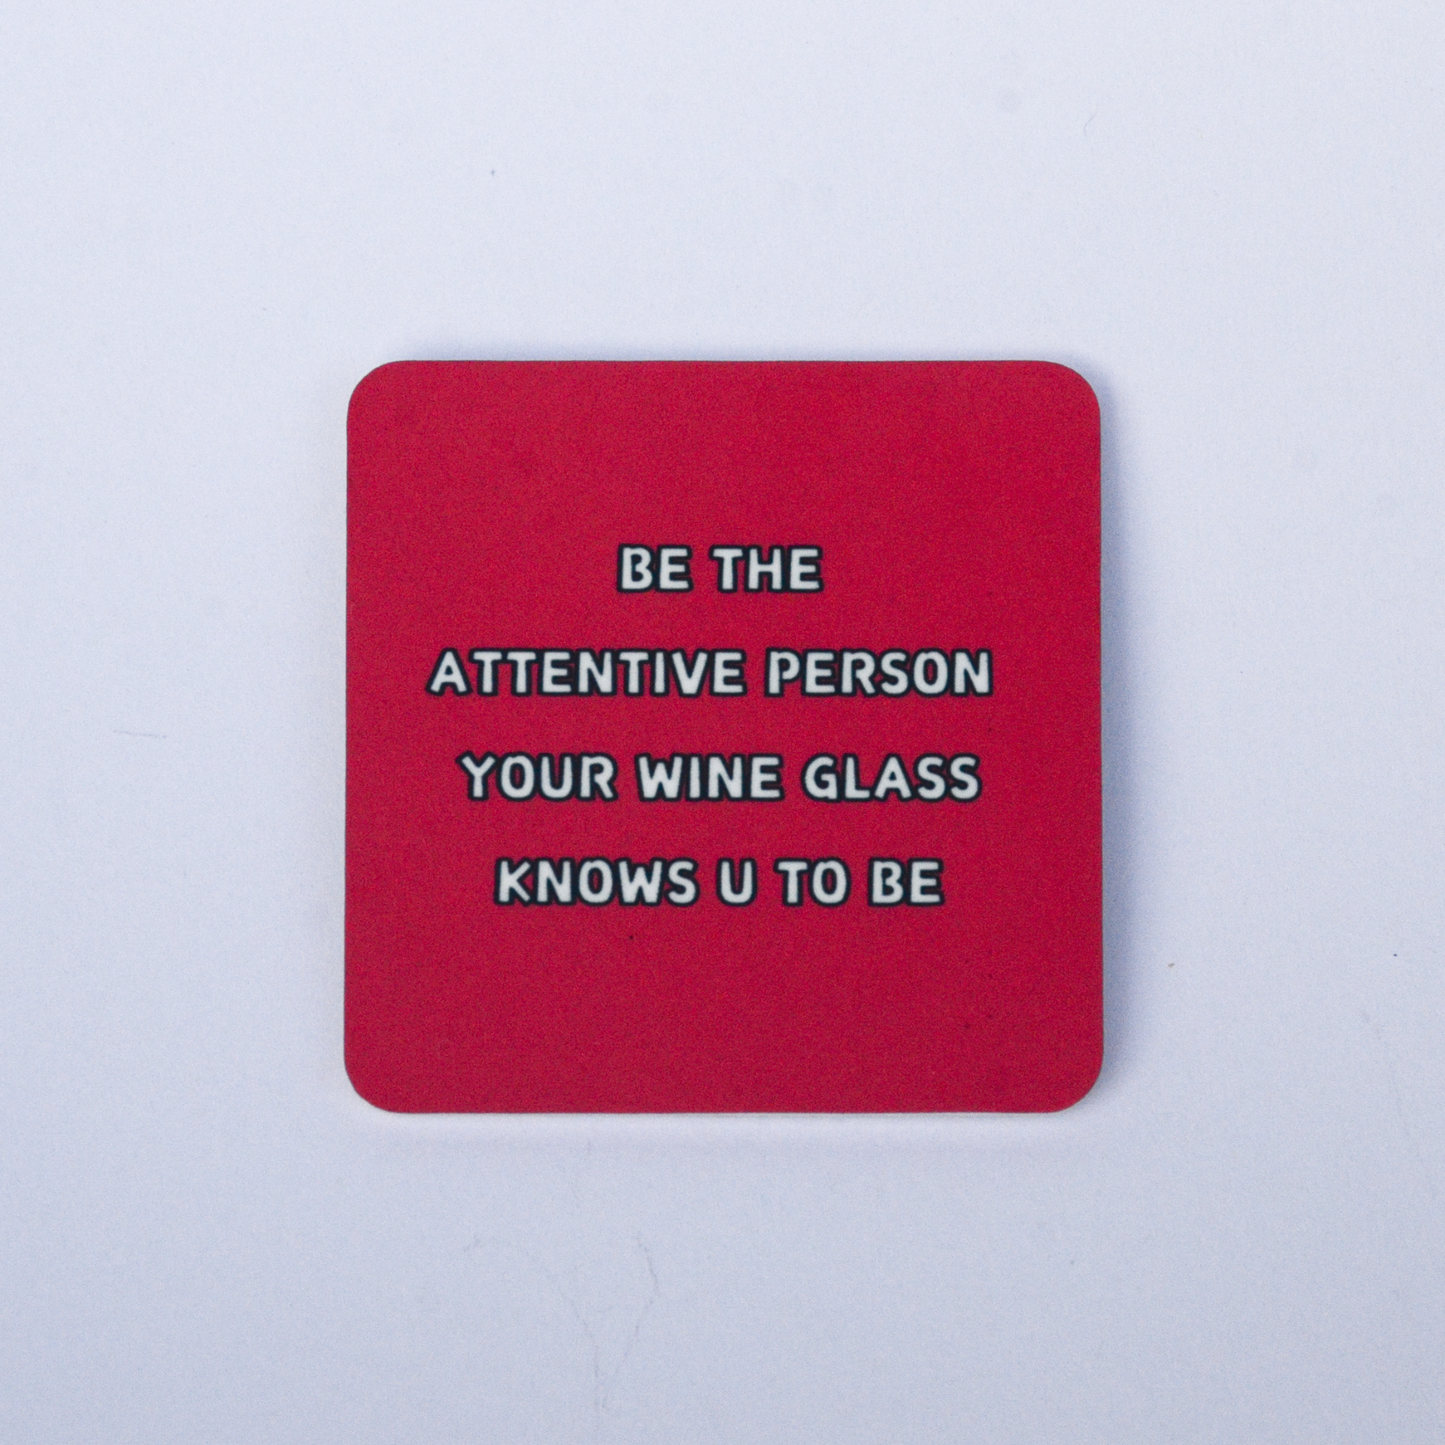 funny refrig magnet red square "be the attentive person your wine glass knows you to be"